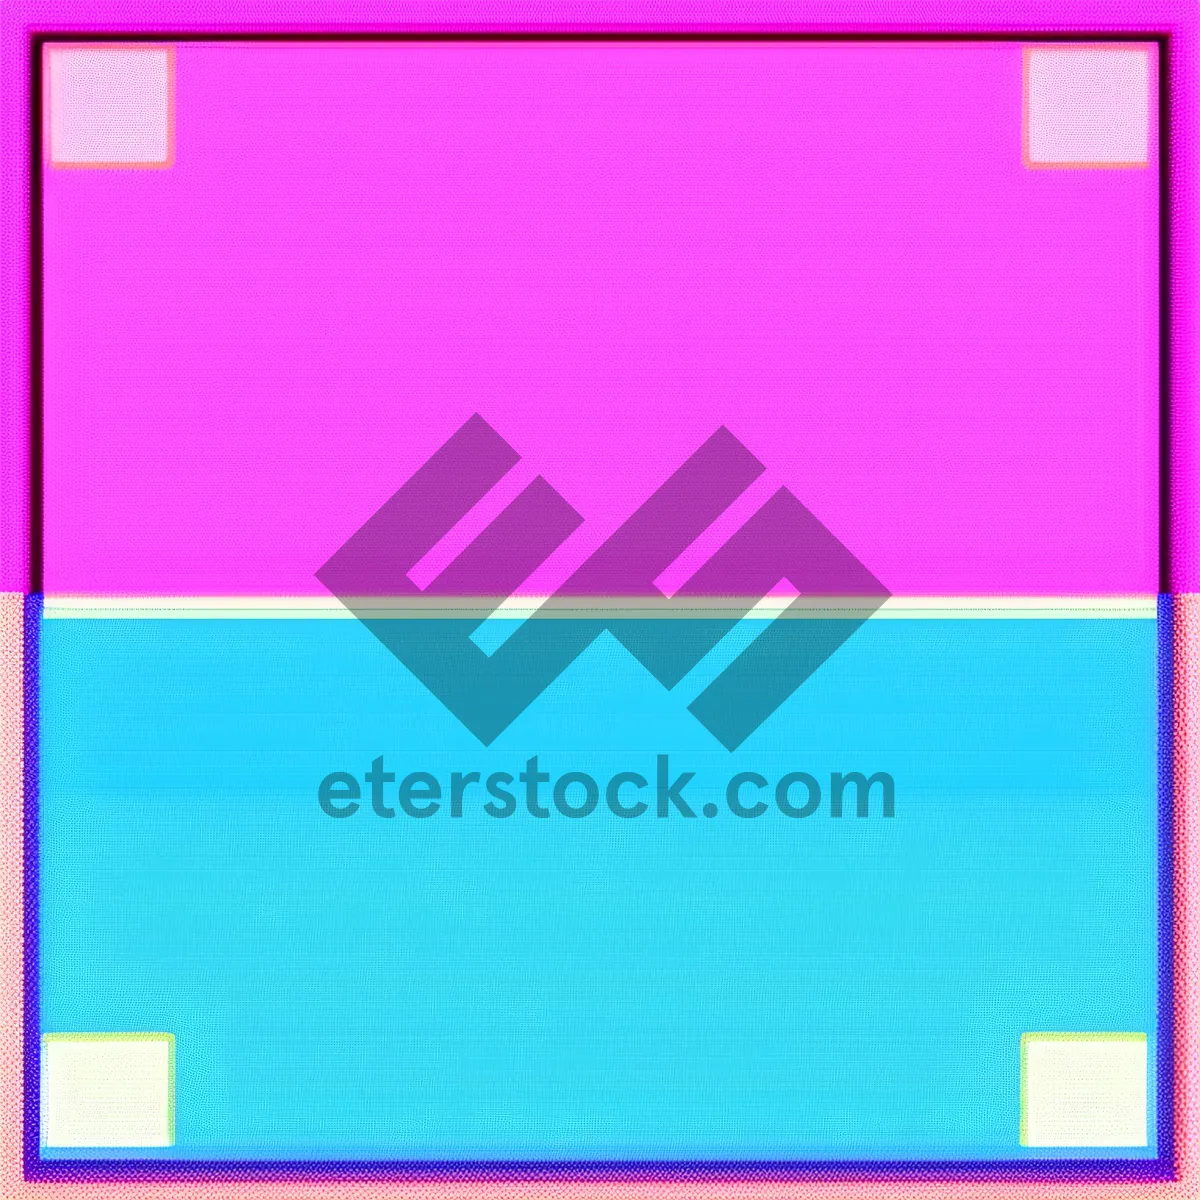 Picture of Blank Paper Frame with Artistic Border and Texture